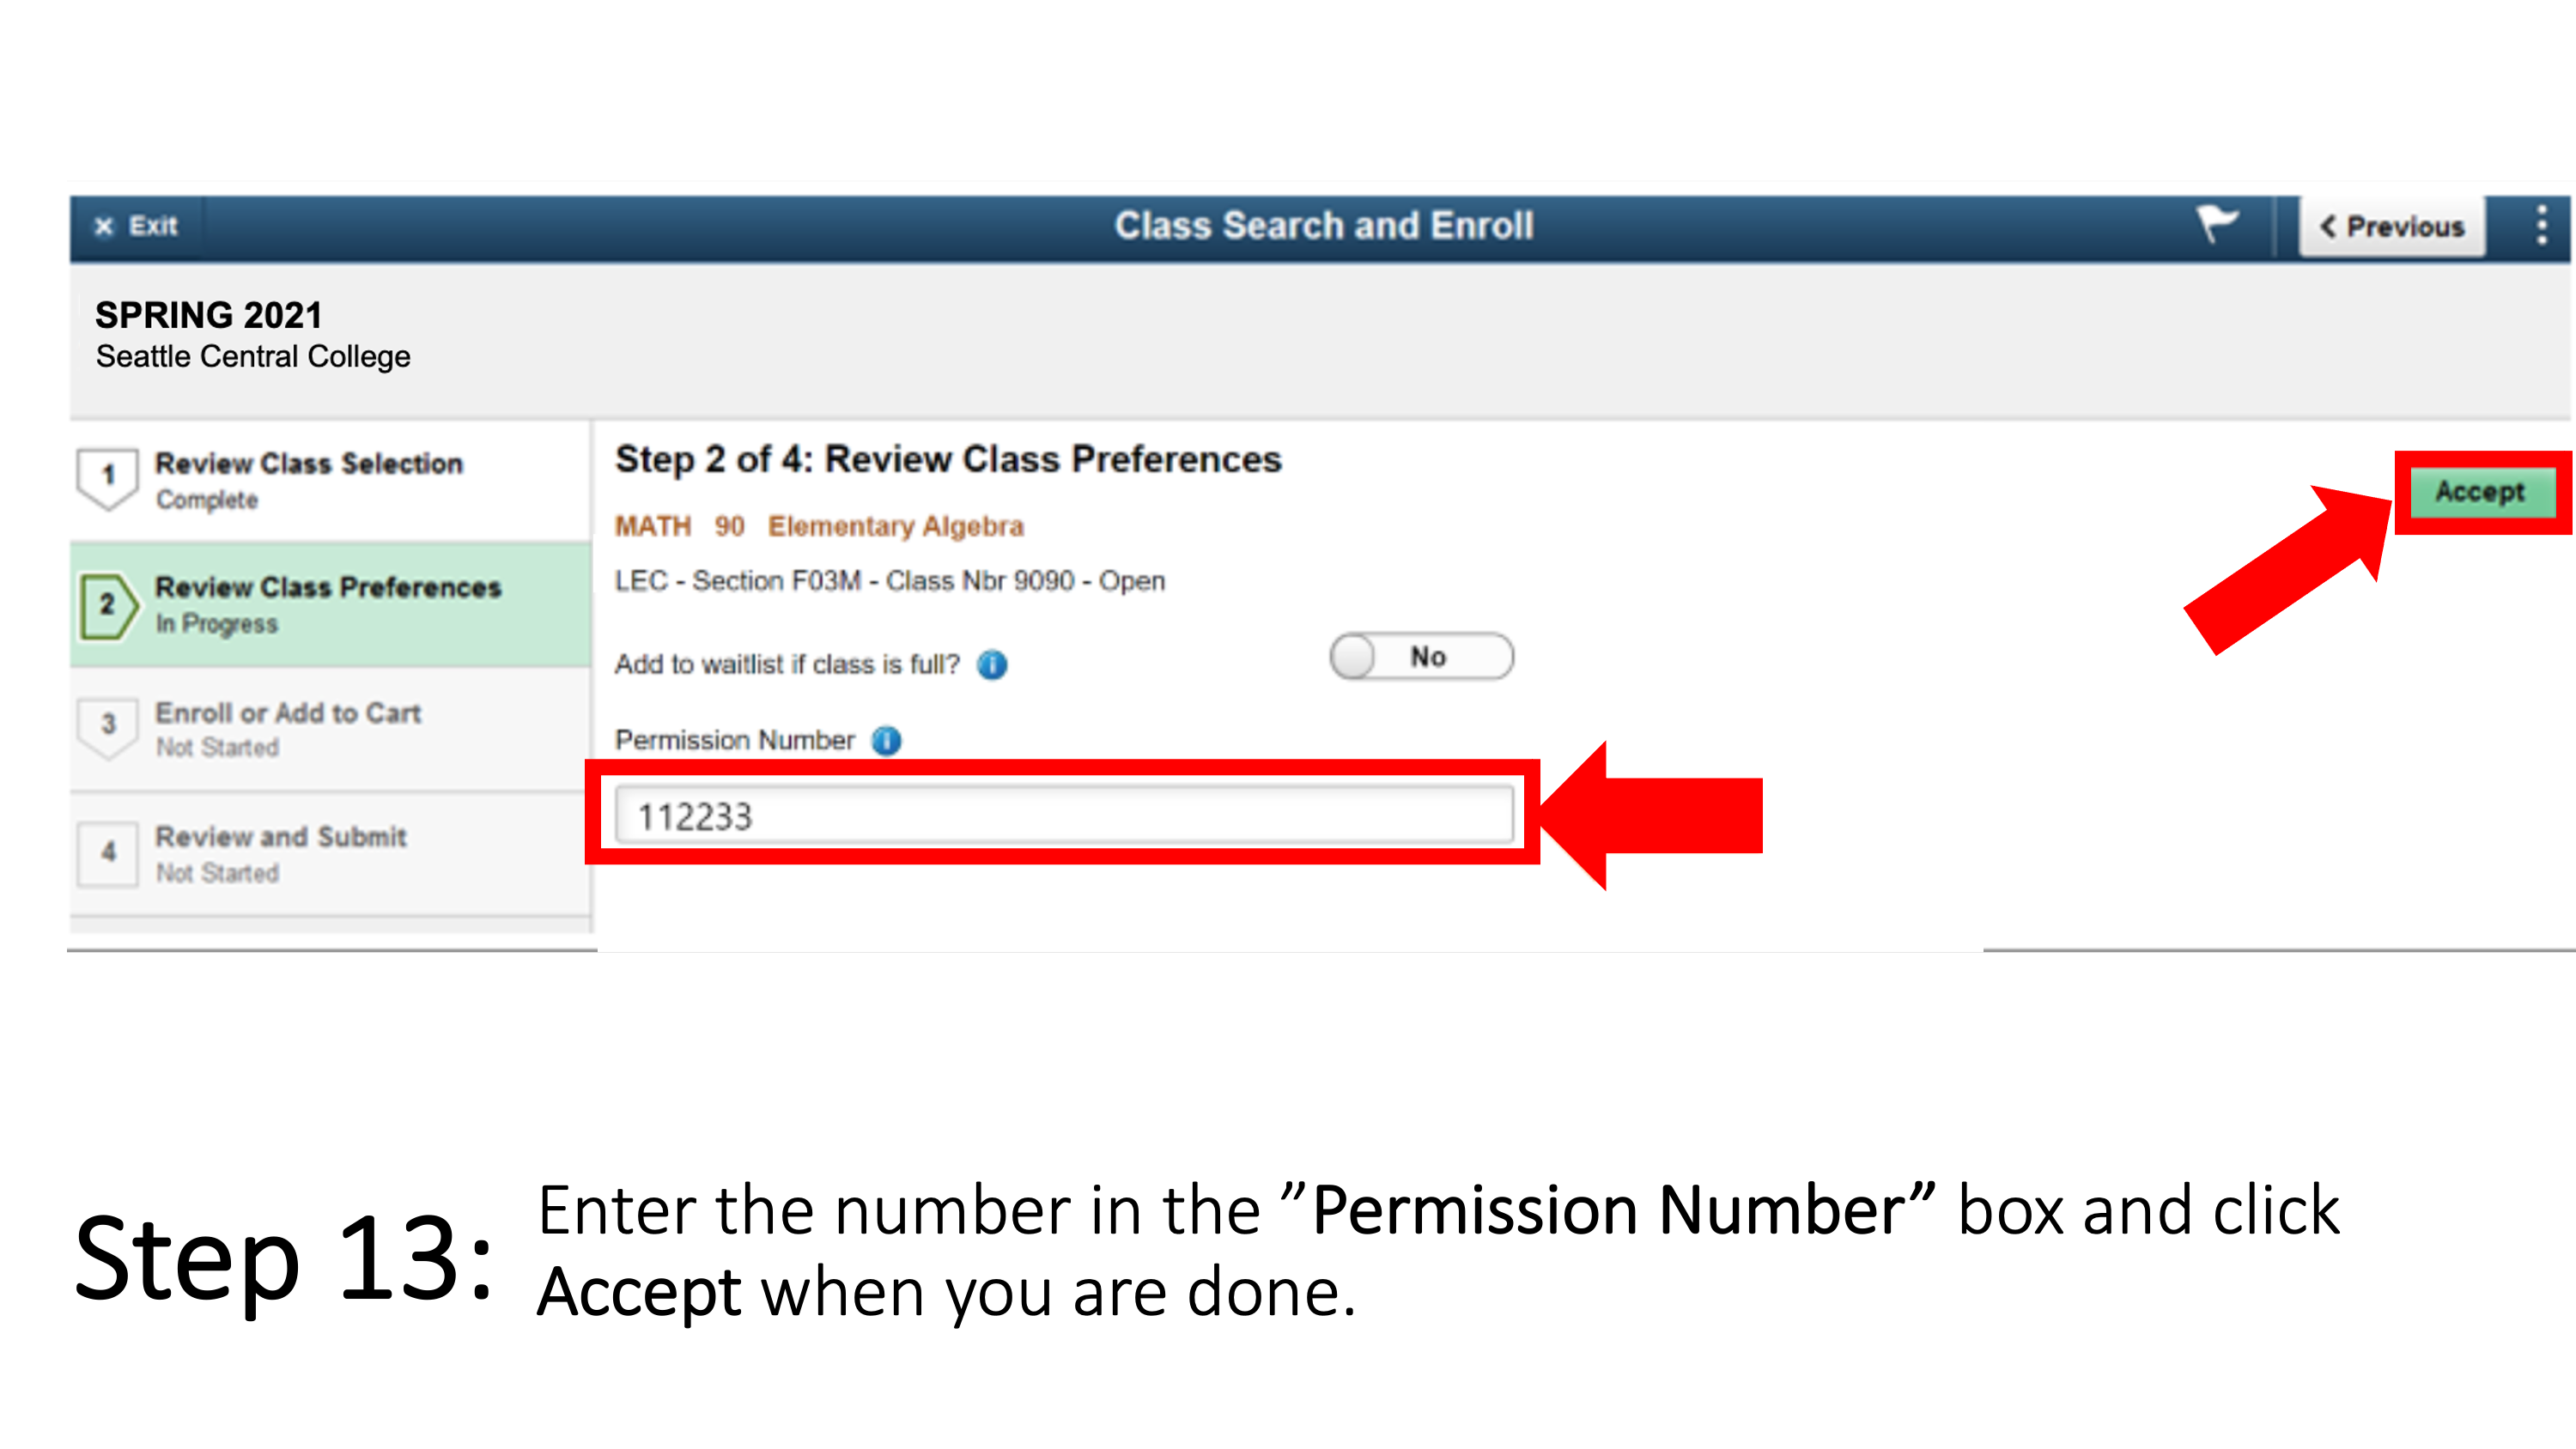 Enter the number in the ”Permission Number” box and click Accept when you are done.